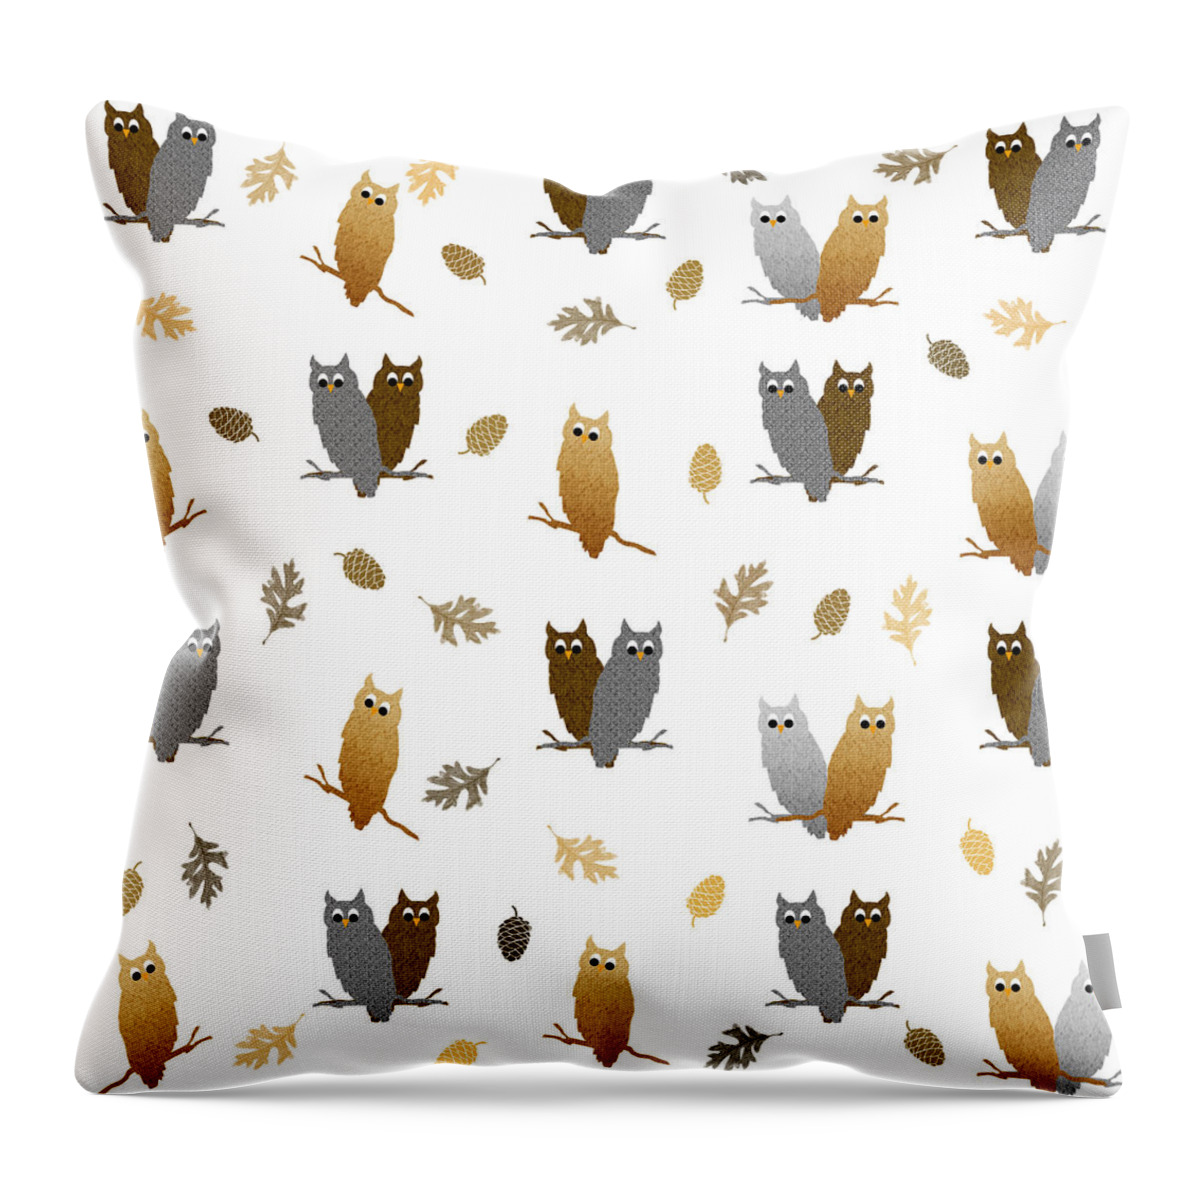 Owls Throw Pillow featuring the mixed media Owl Pattern by Christina Rollo